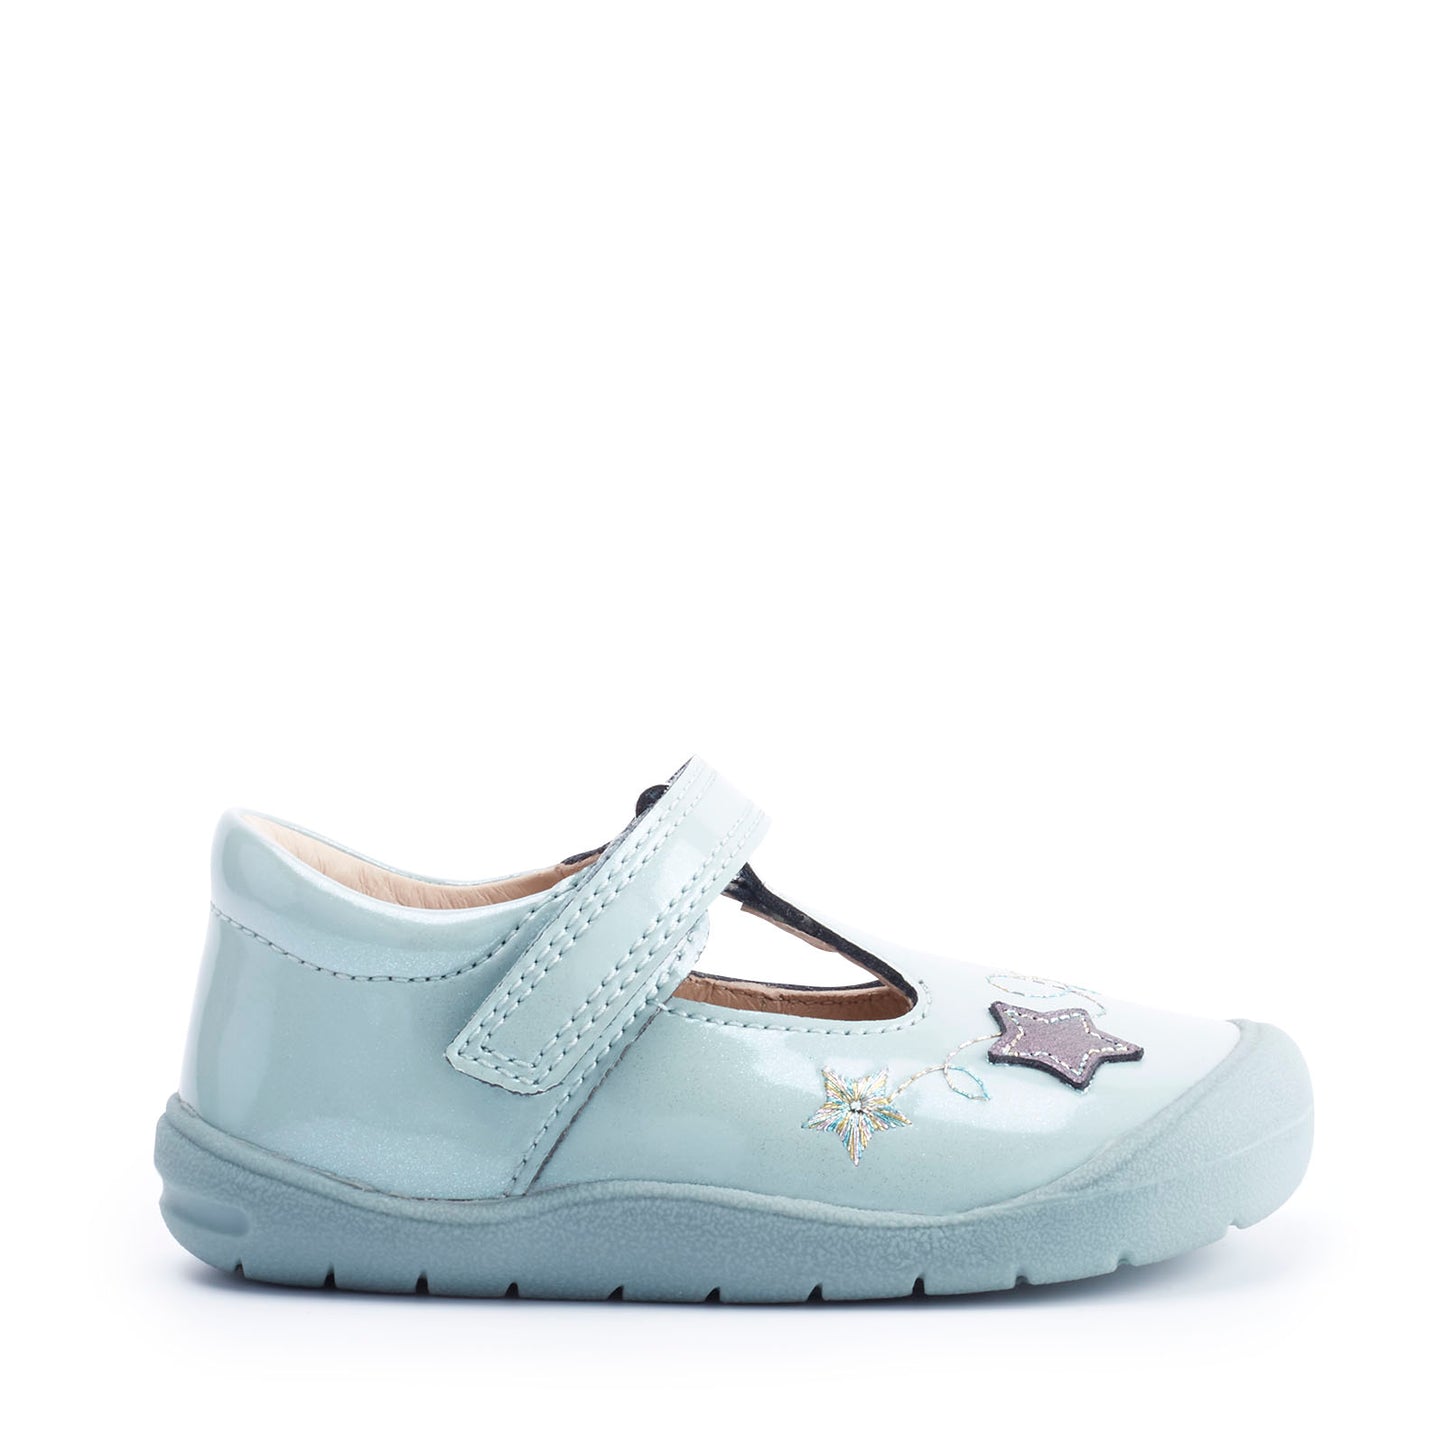 StartRite SPARKLE Leather Shoes (Sage)  21-23.5